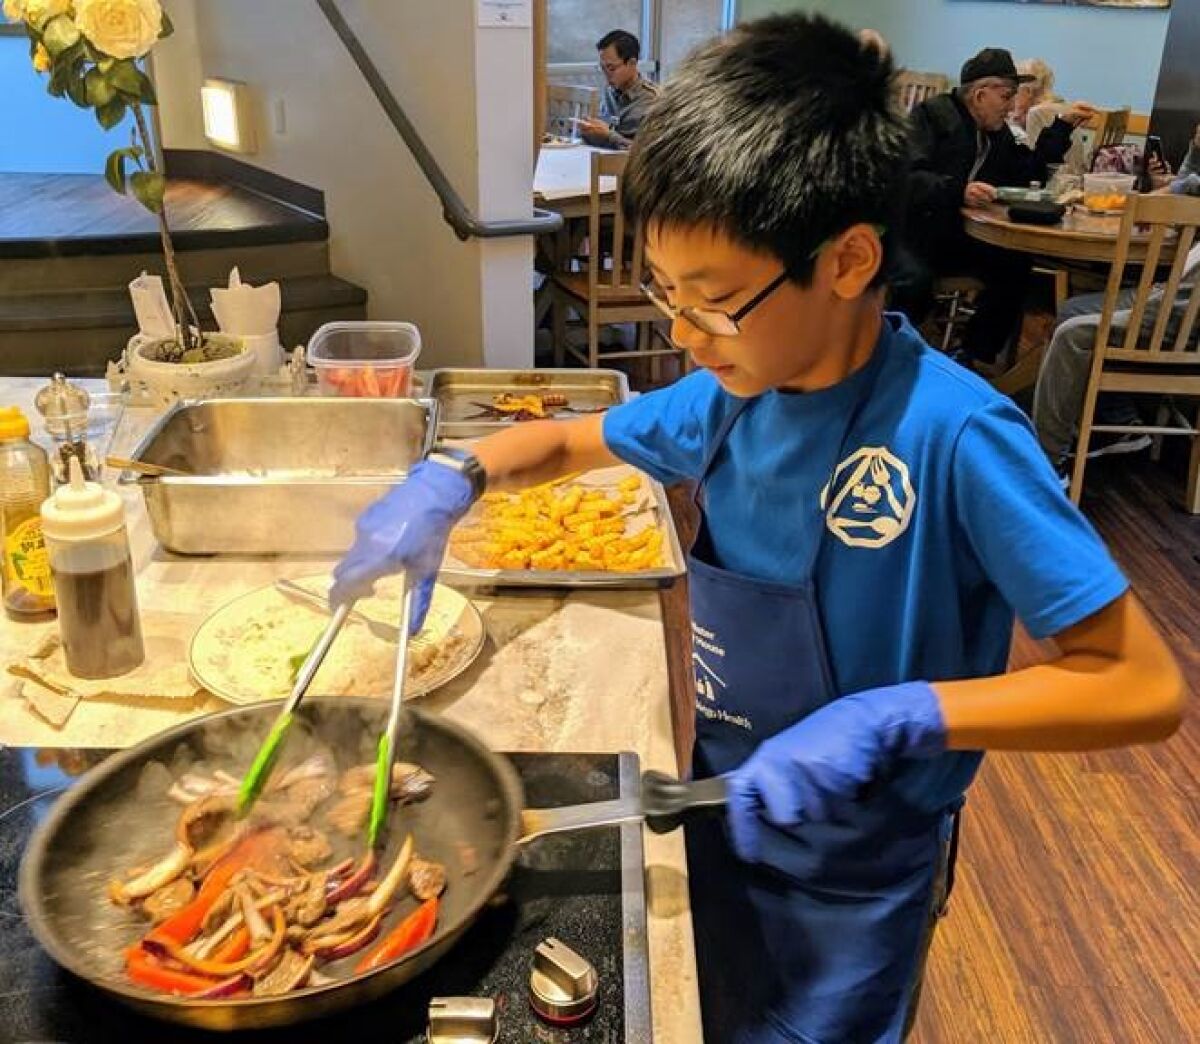 Aiden Lo cooking dinner for a hospital guest at UC San Diego Bannister House.